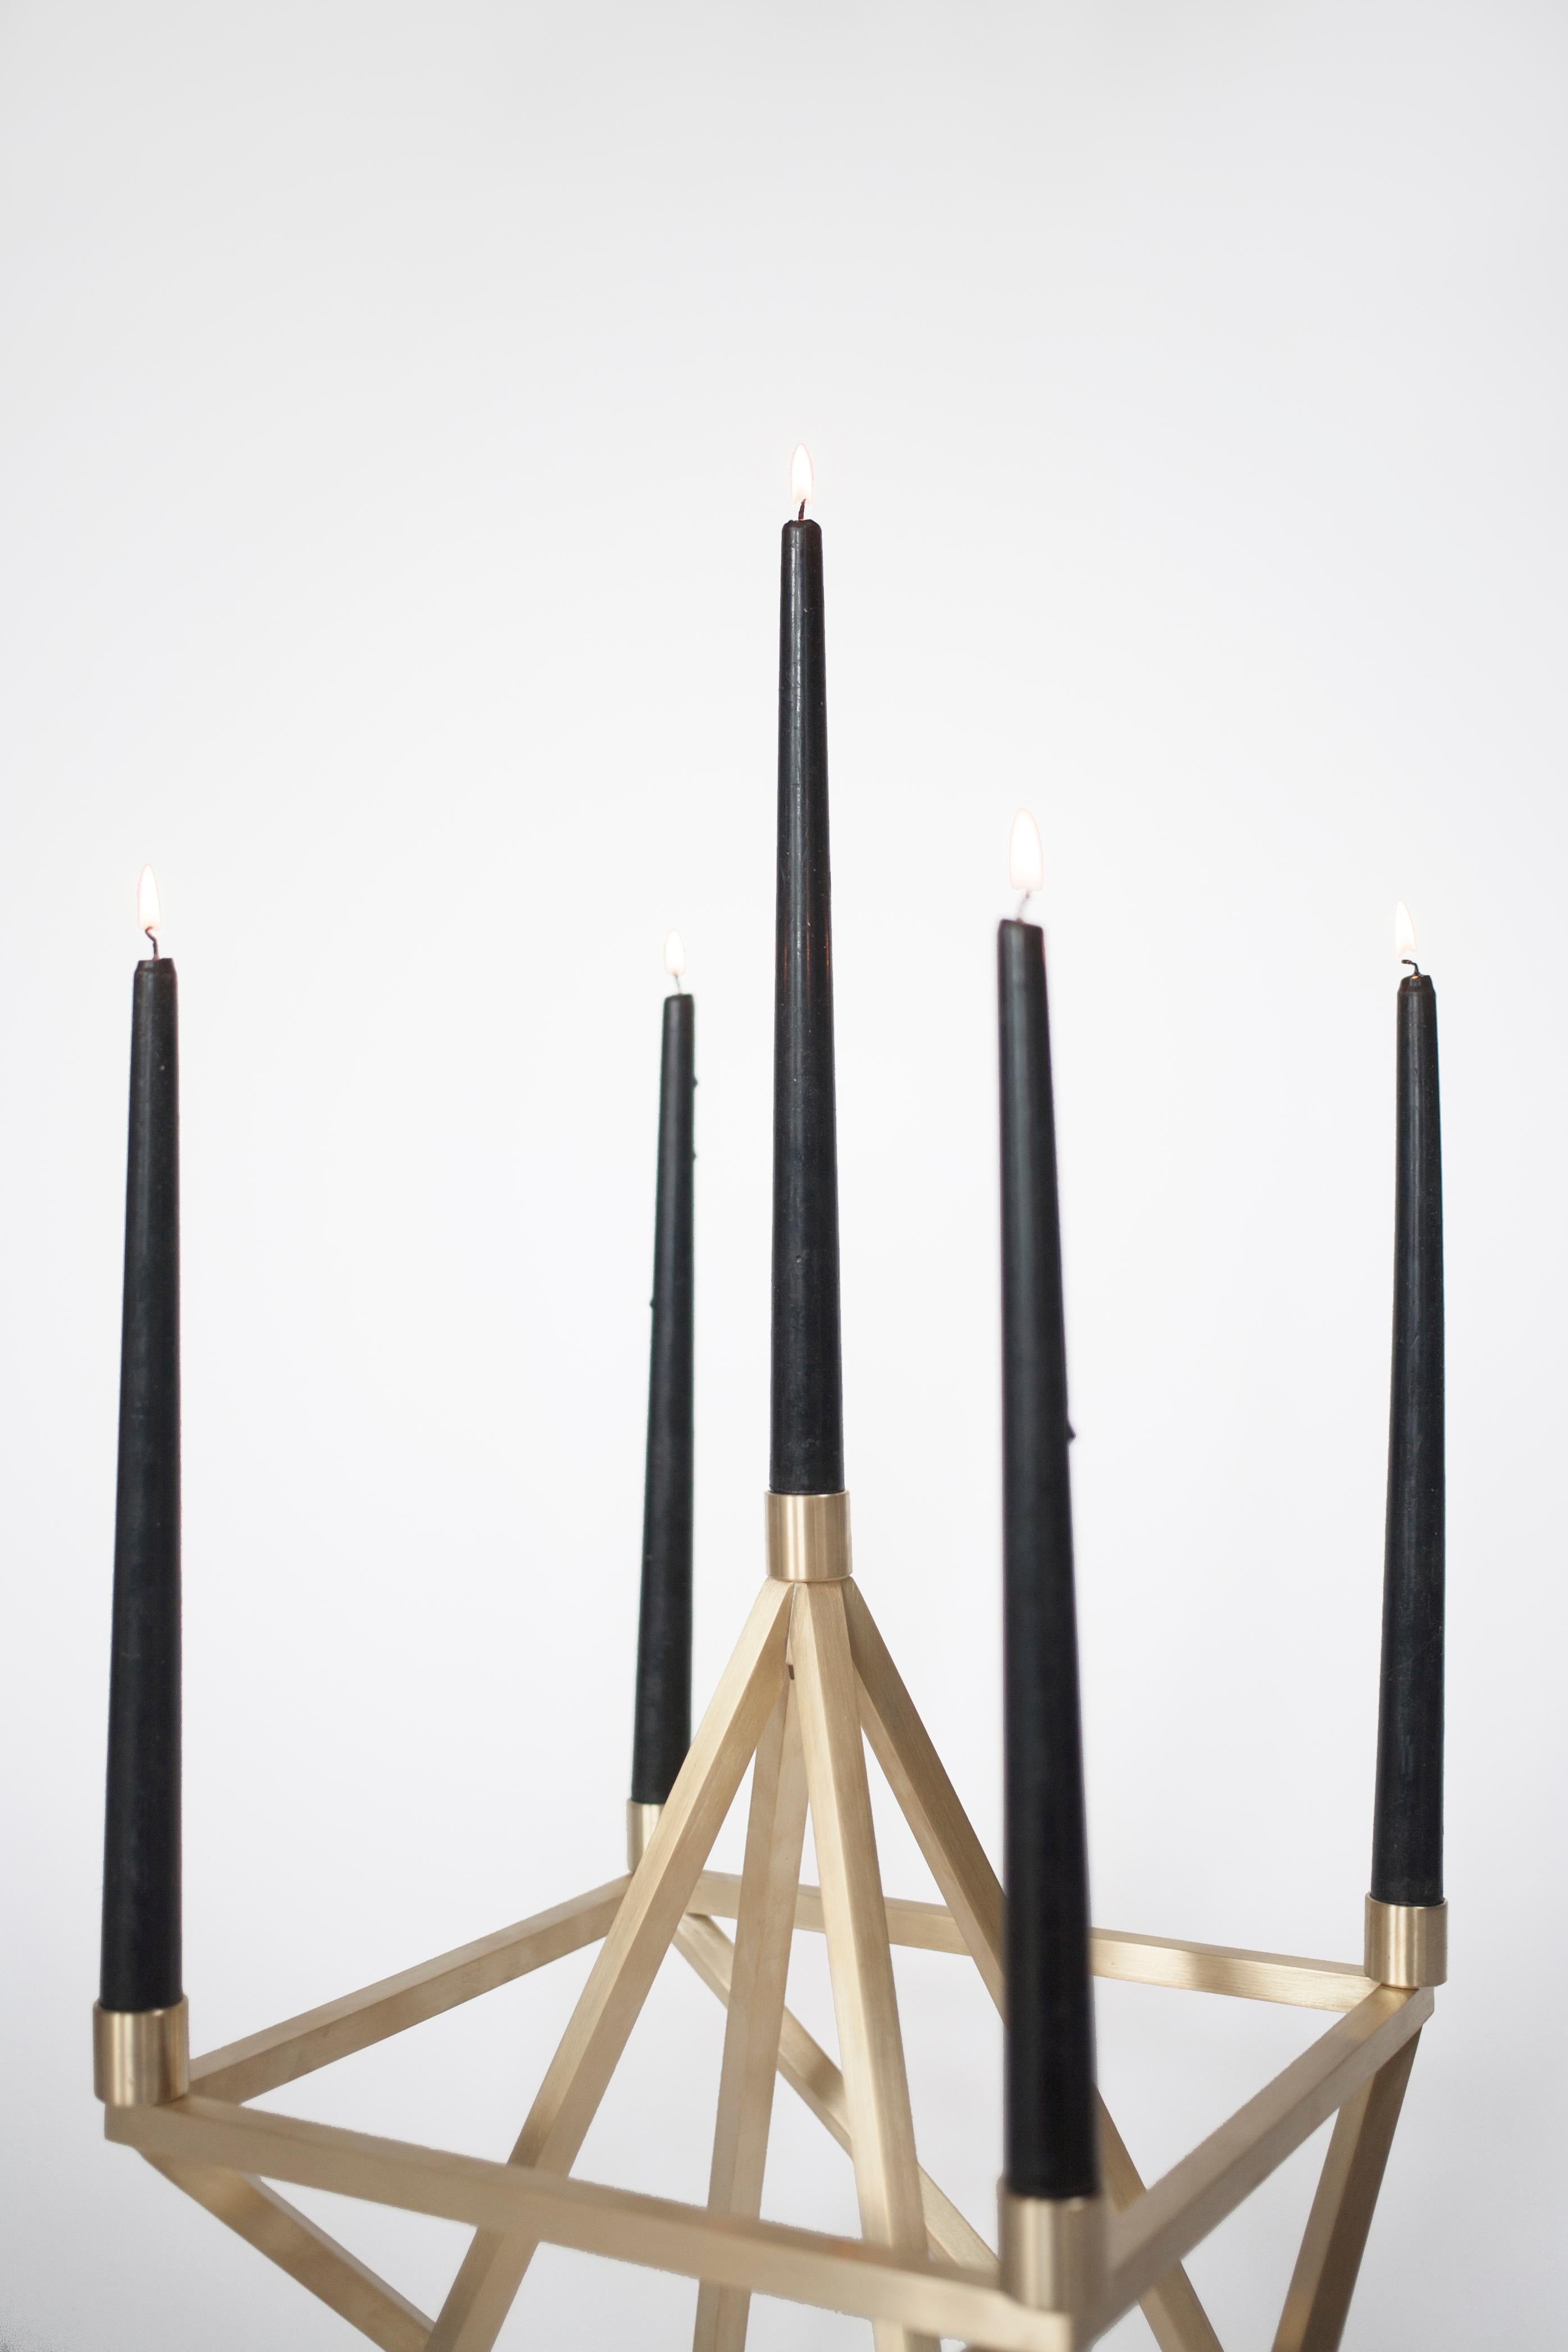 Material Lust [American, b. 1981,1986]
Pagan Candelabra, 2014 
Shown in brushed brass.
Holds five 1